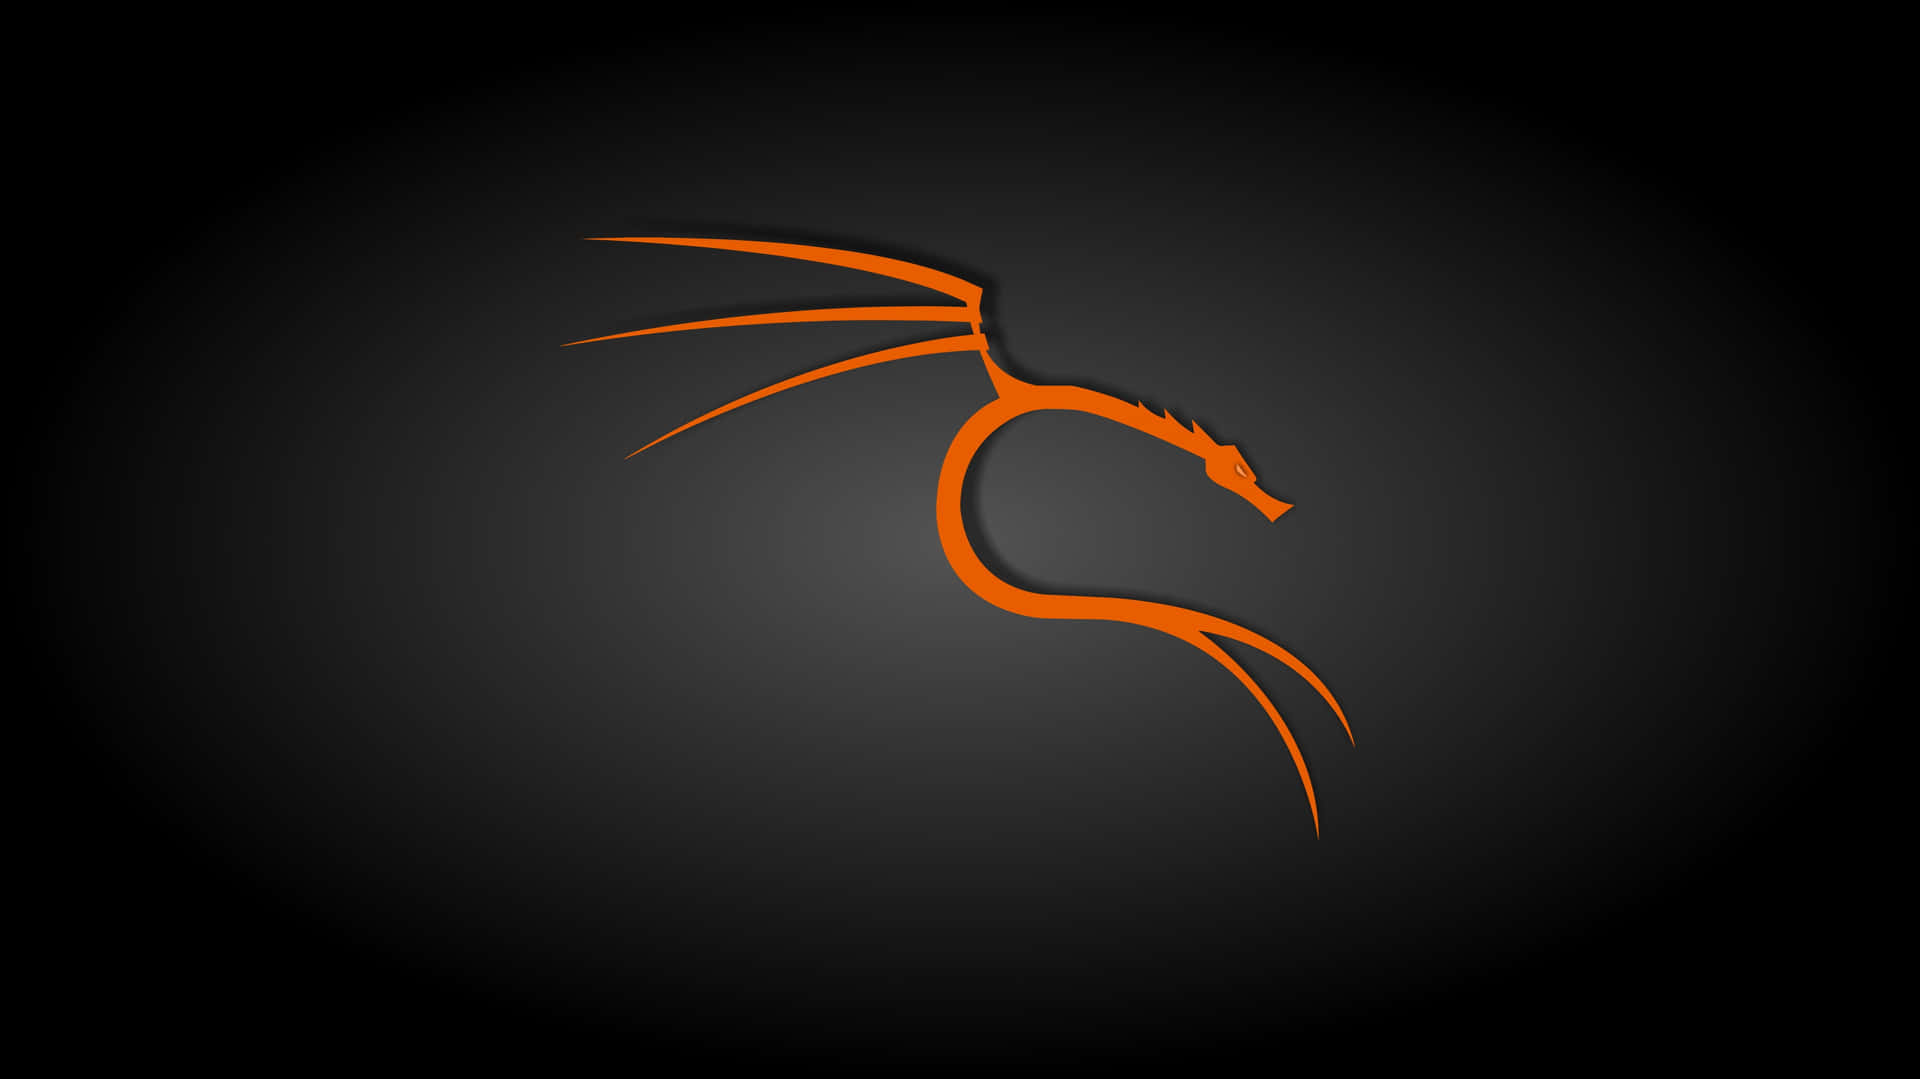 Strengthen Your Security Knowledge with Kali Linux